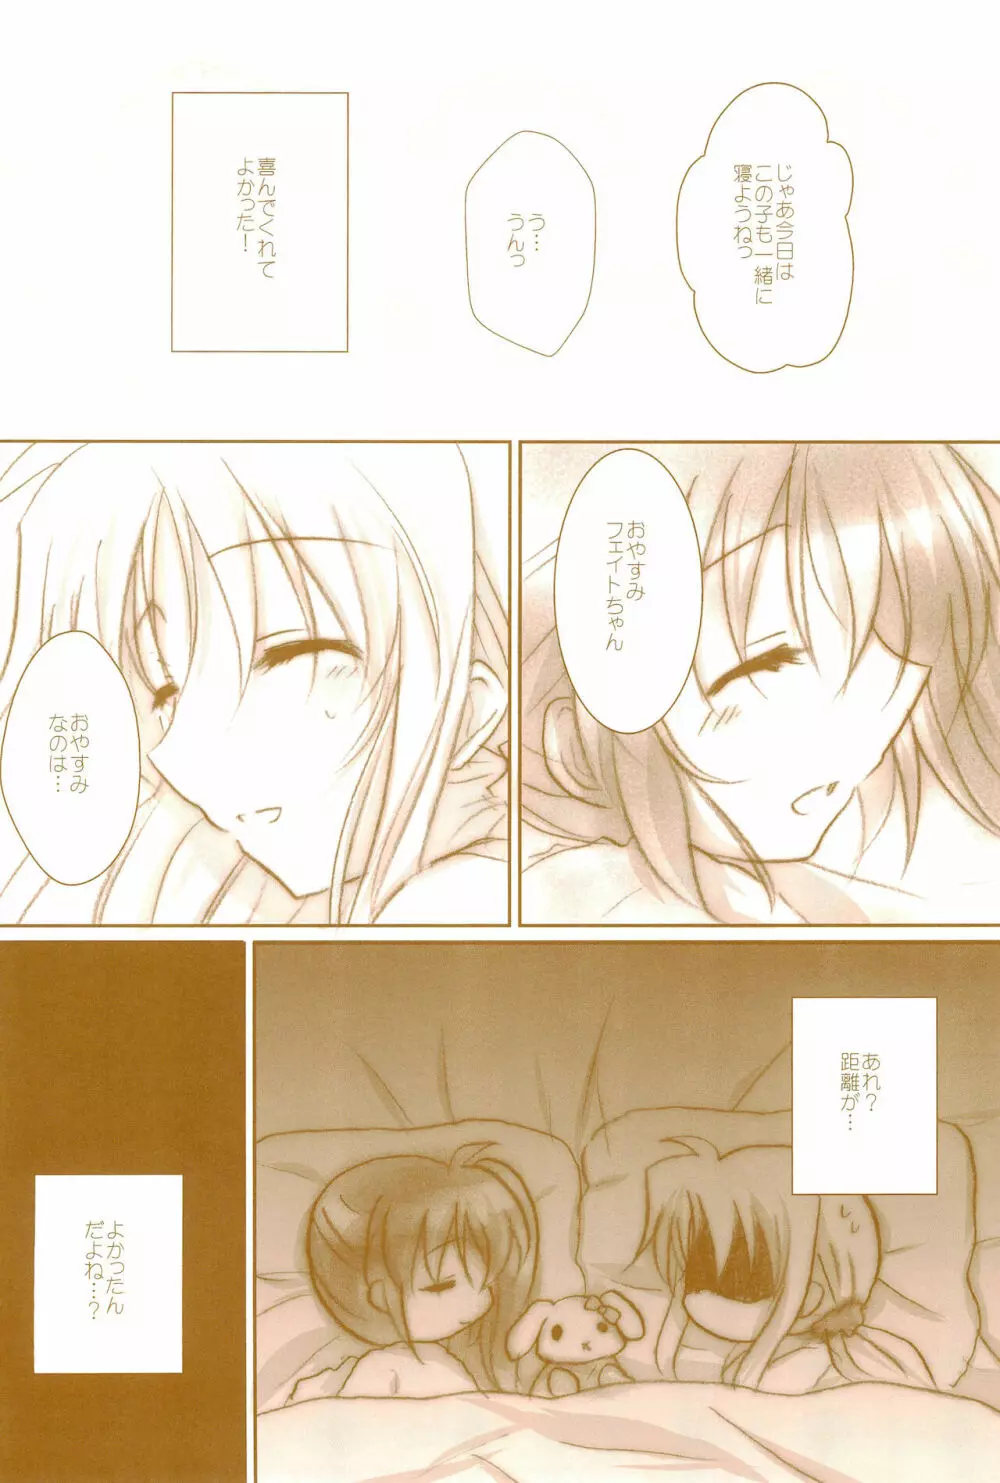 Love Life ～なのフェイなの再録集 3～ - page50